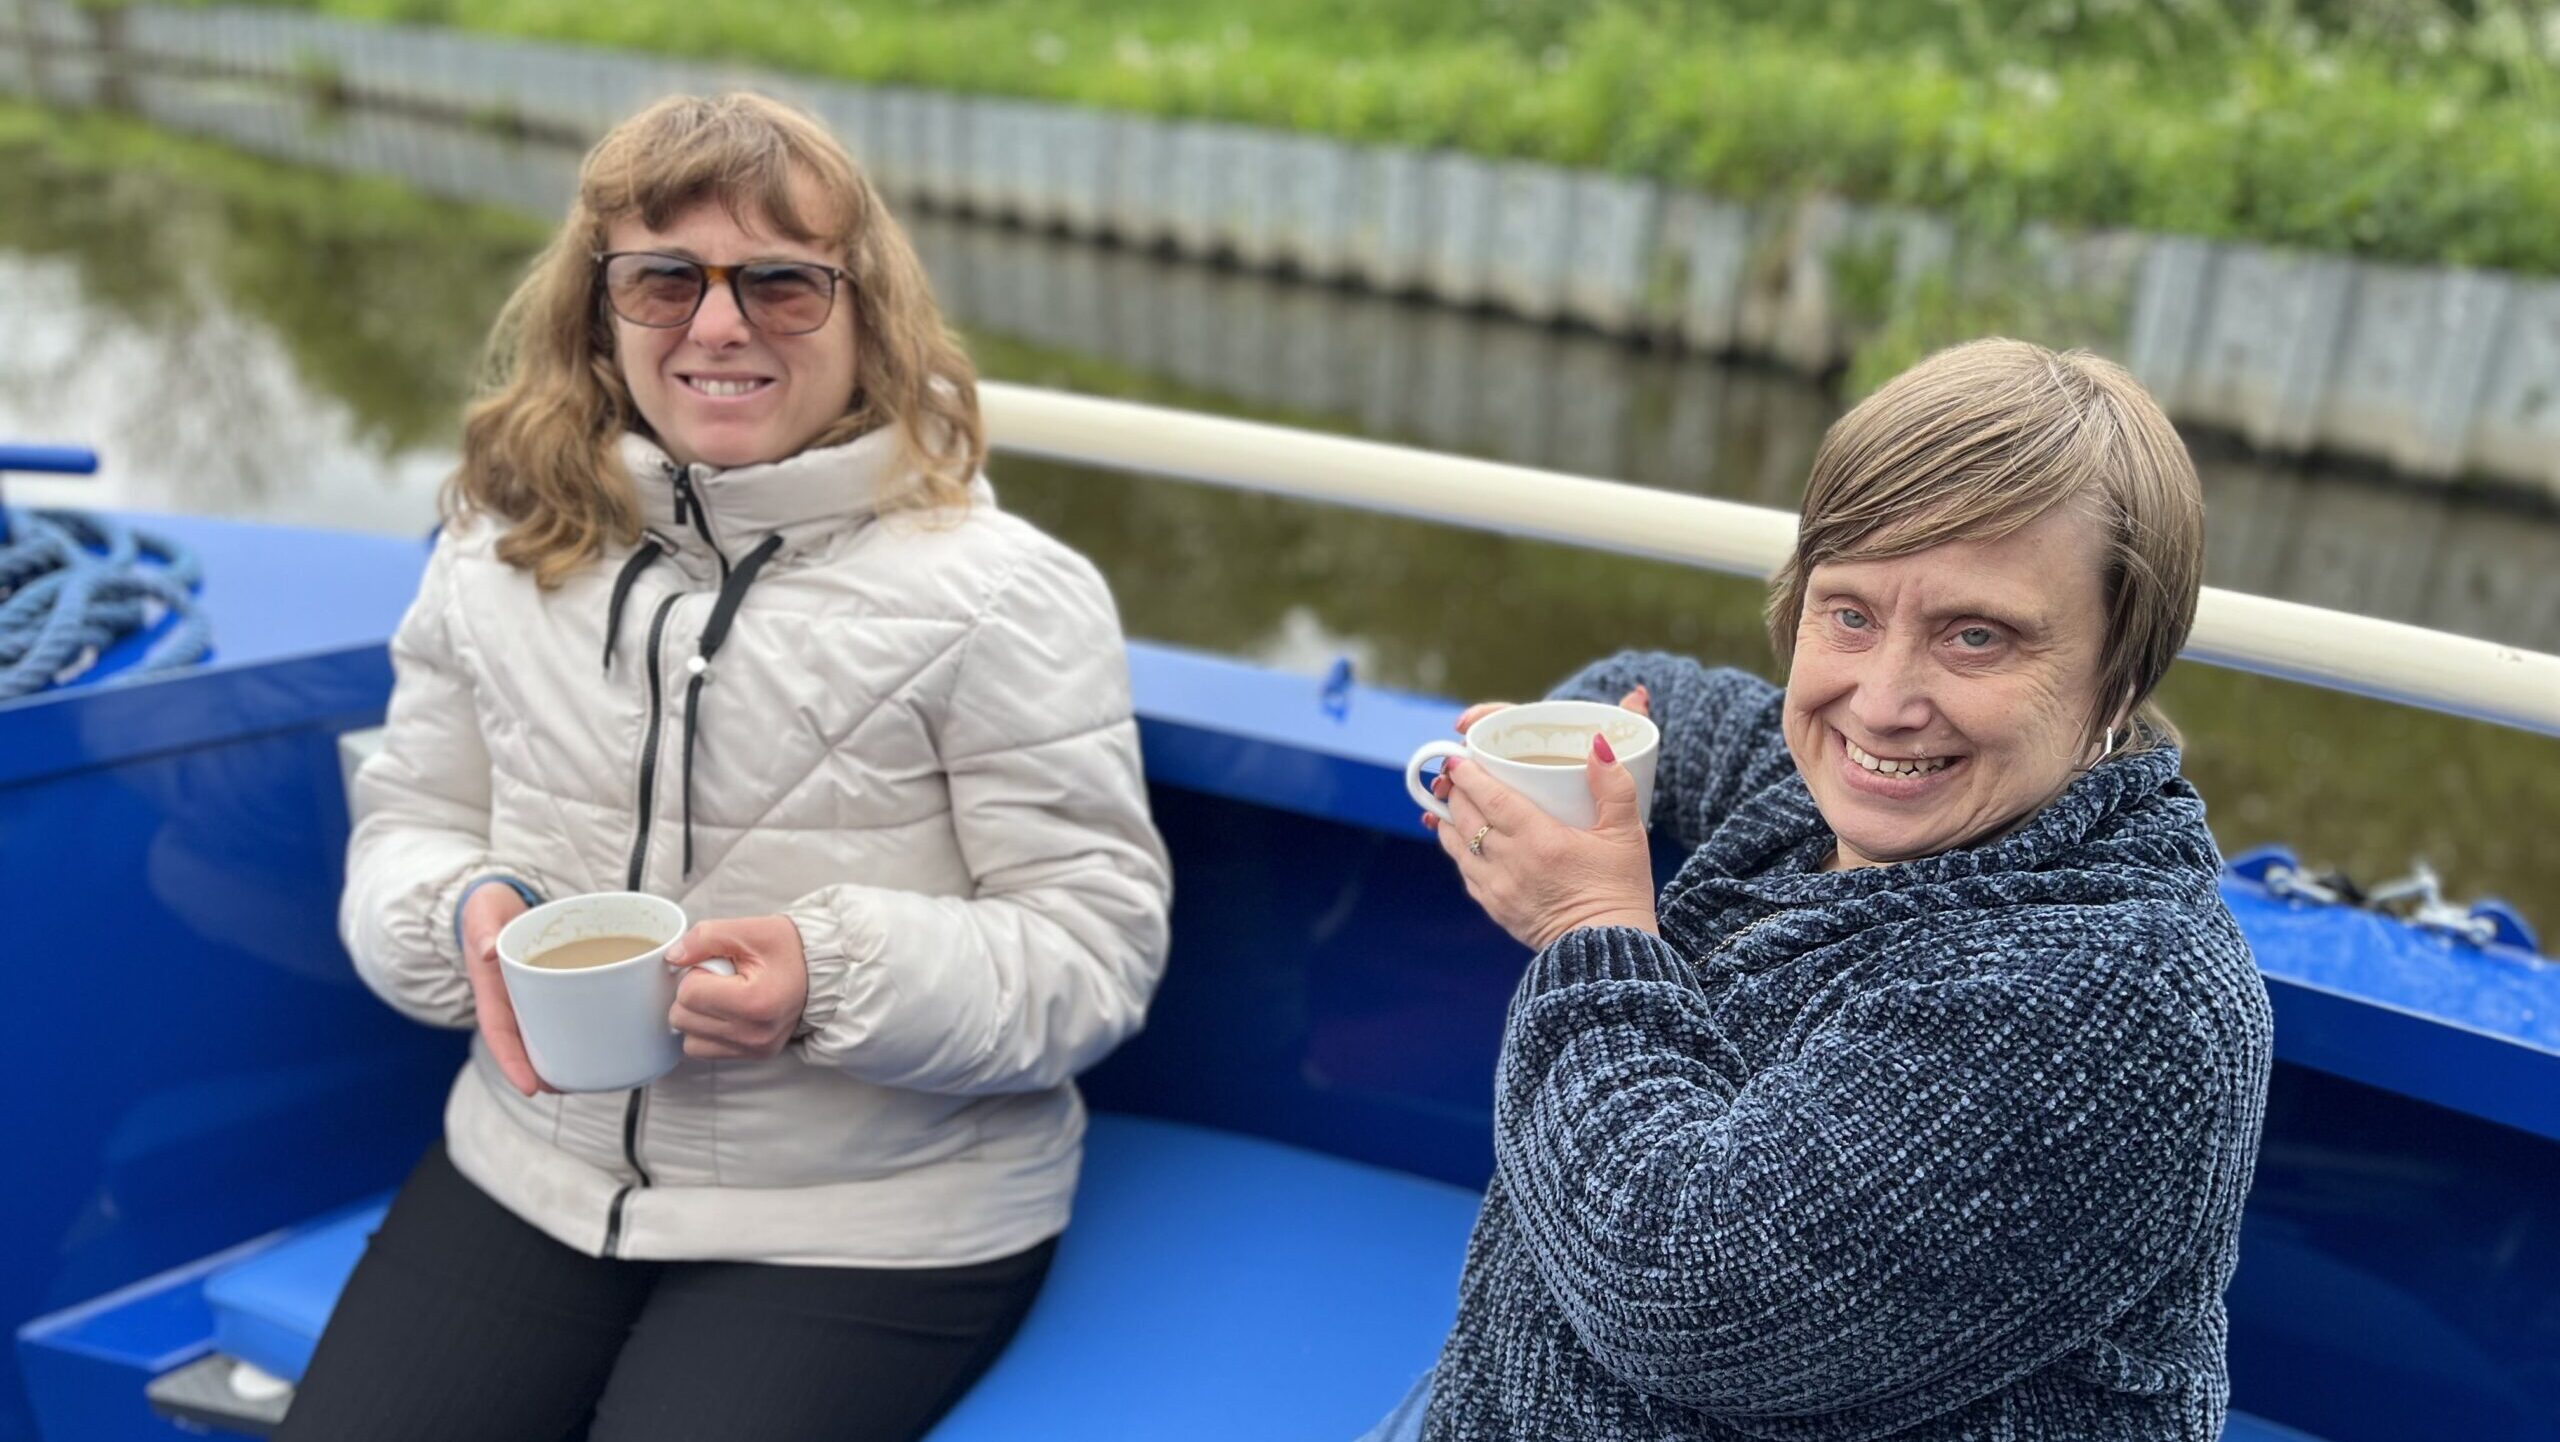 Two women are smiling for the camera. Each one is holding a cup of tea and they are on an accessible canal boat trip.